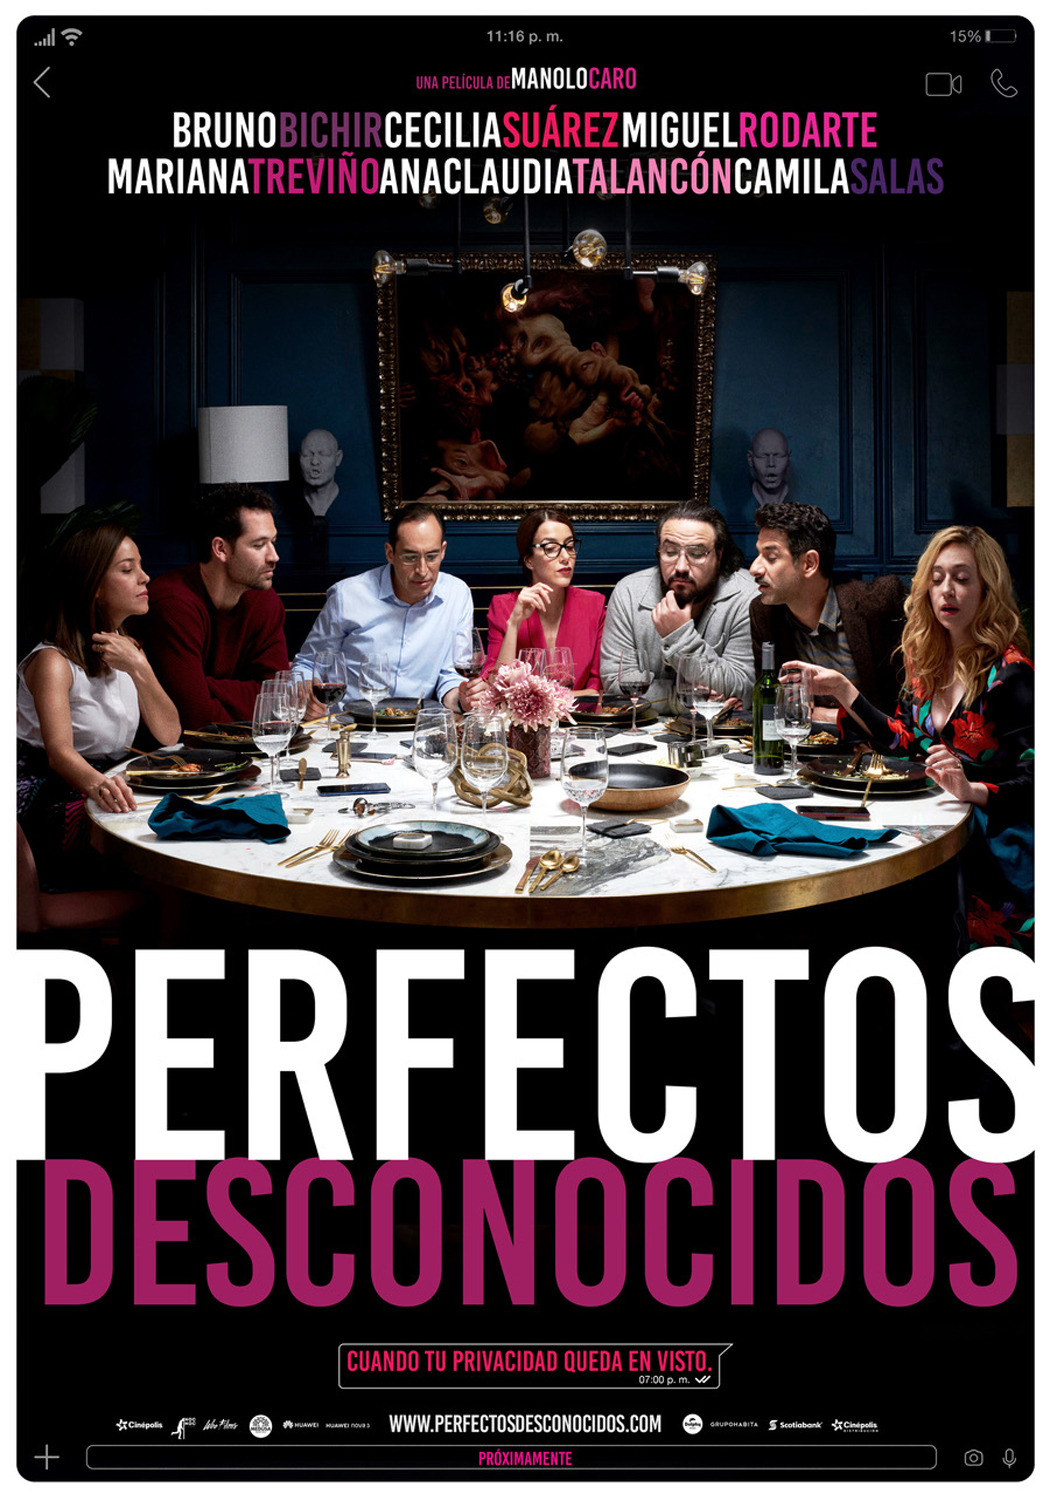 Extra Large Movie Poster Image for Perfectos desconocidos (#5 of 8)